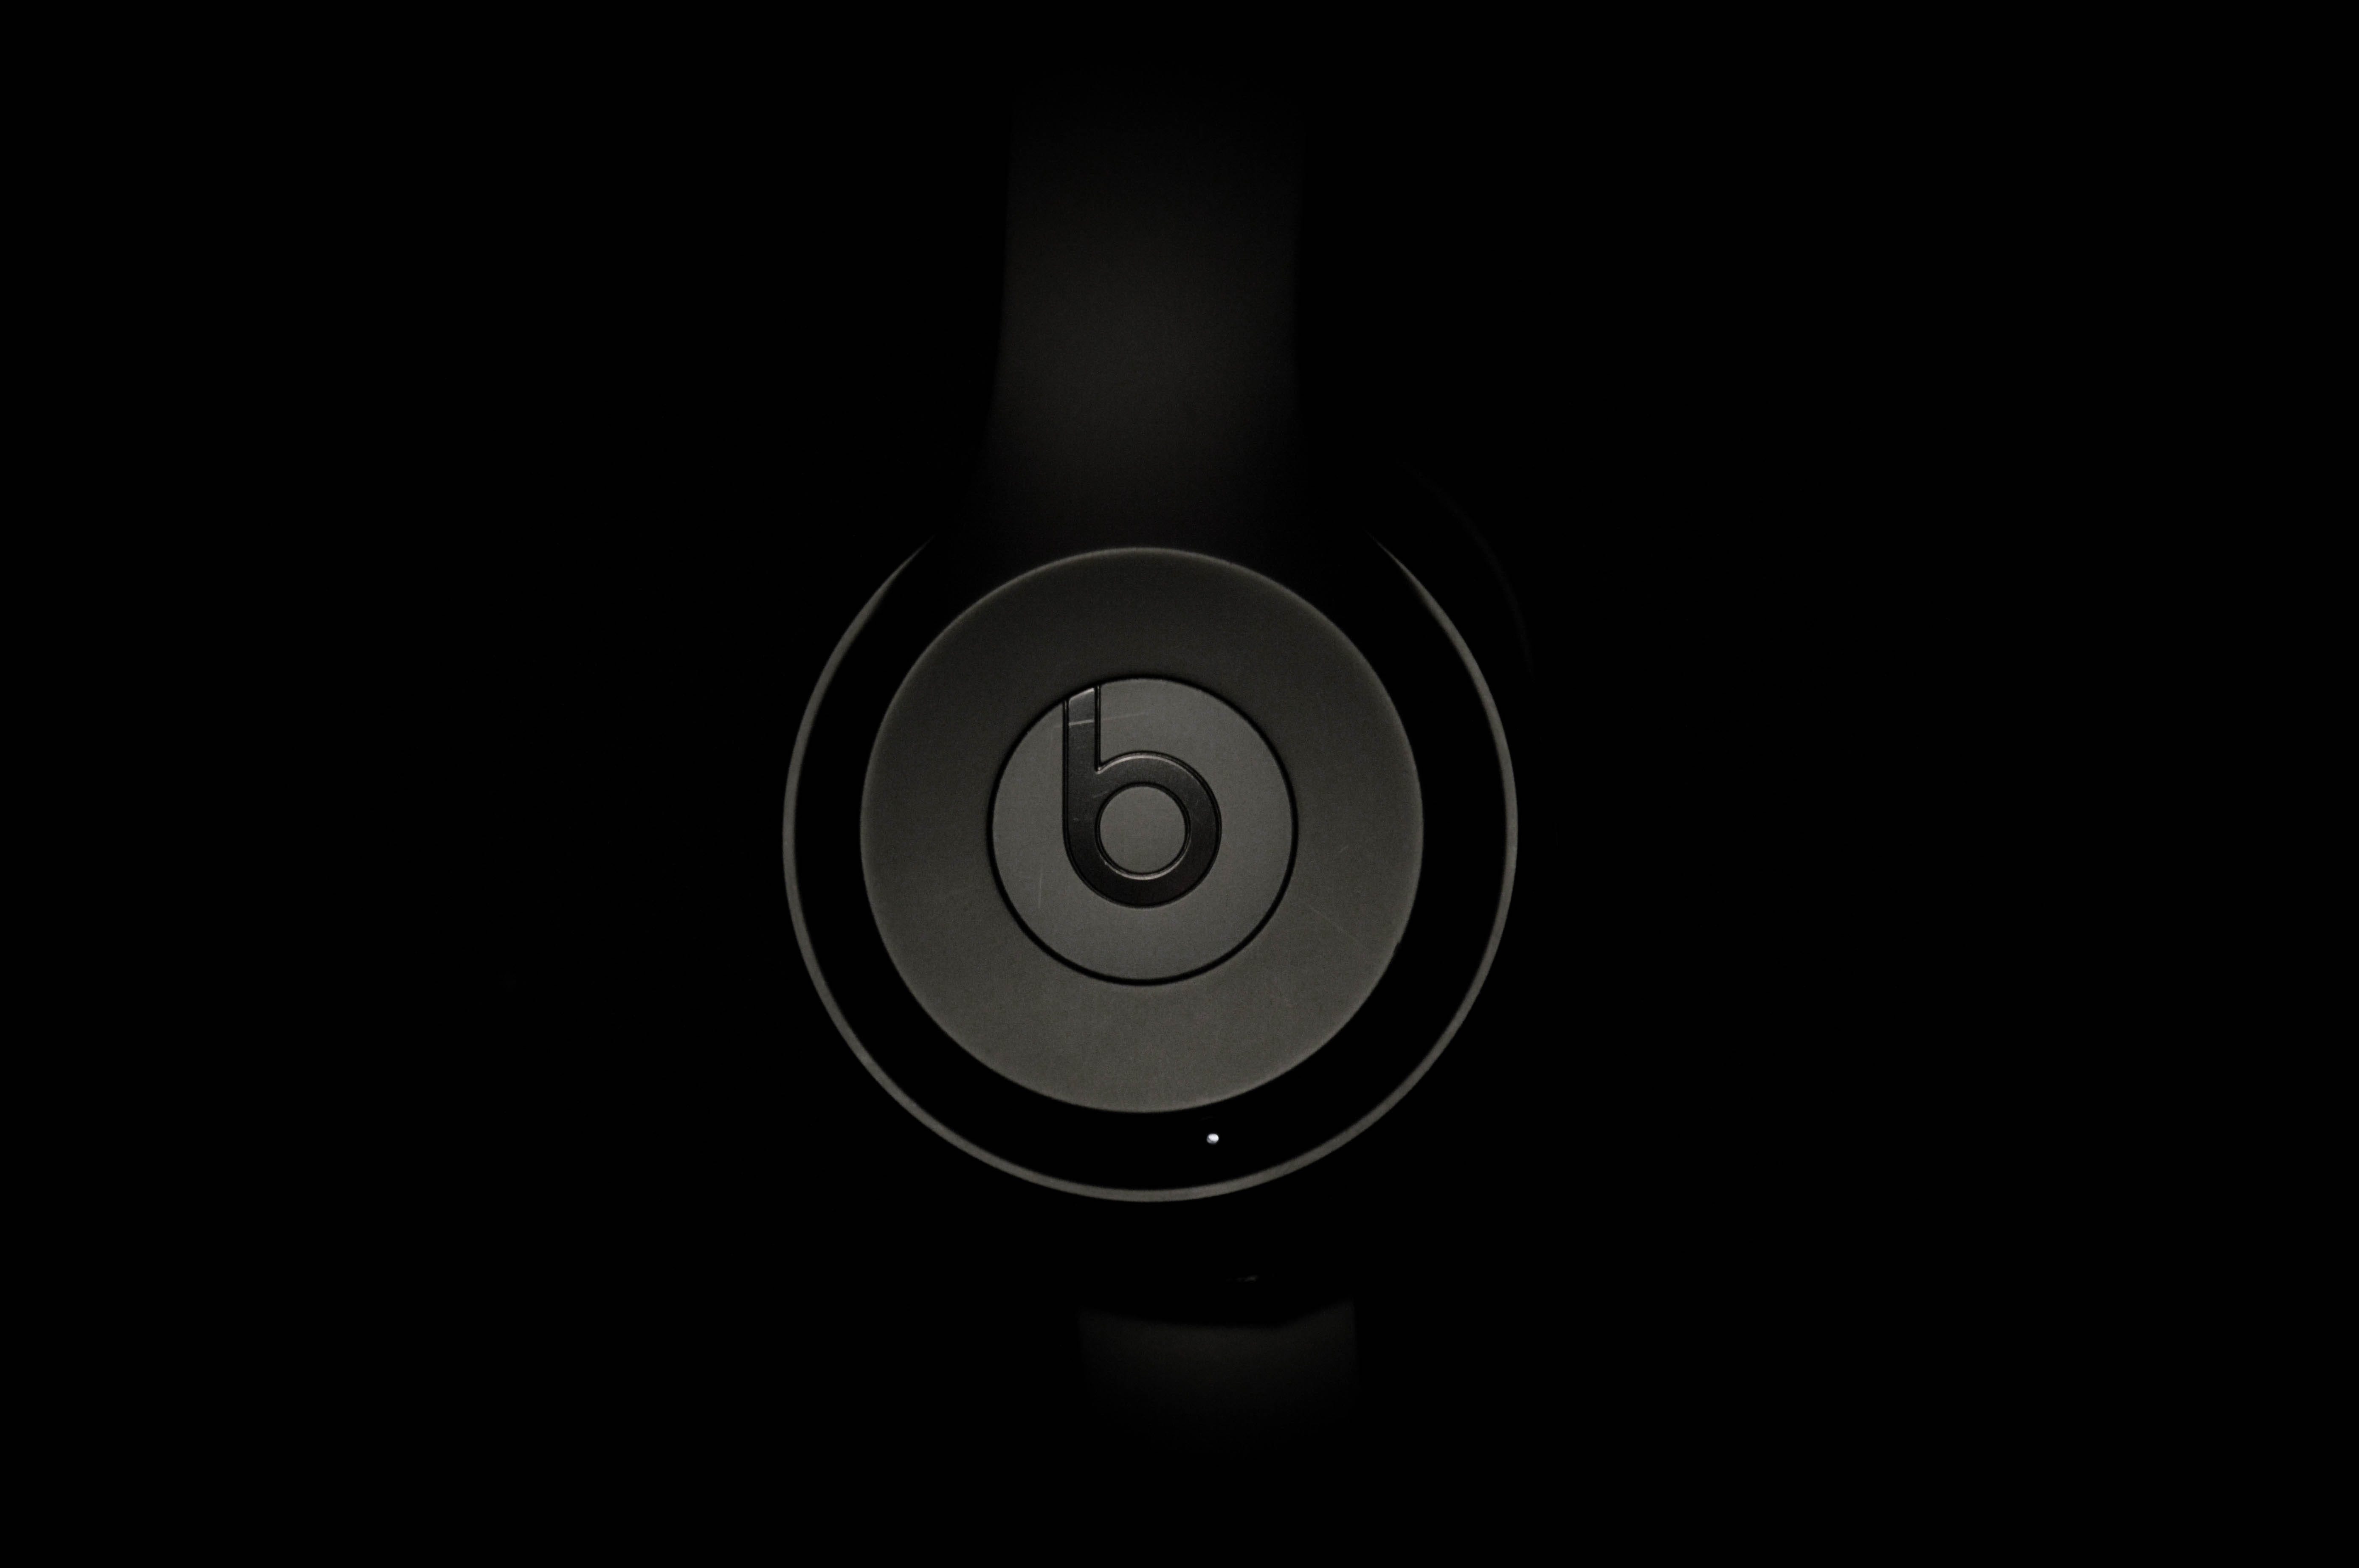 how much did apple buy beats